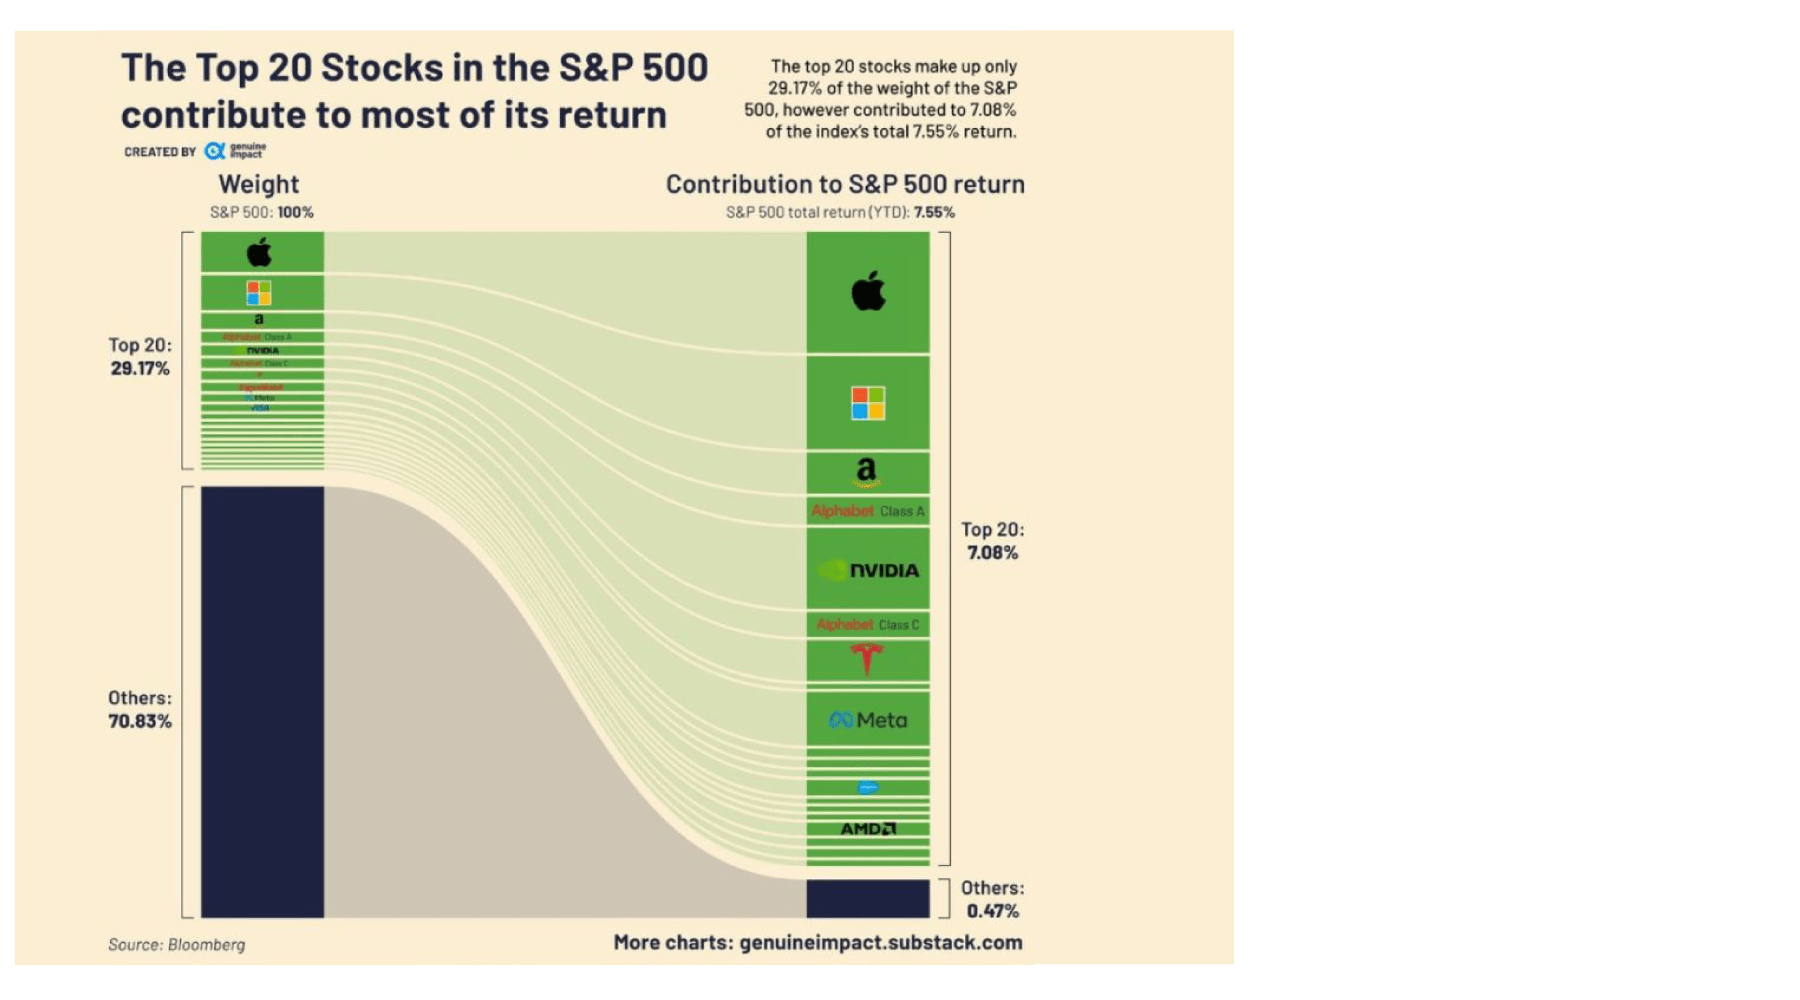 A graph showing the top 20 stocks in the s&p 500